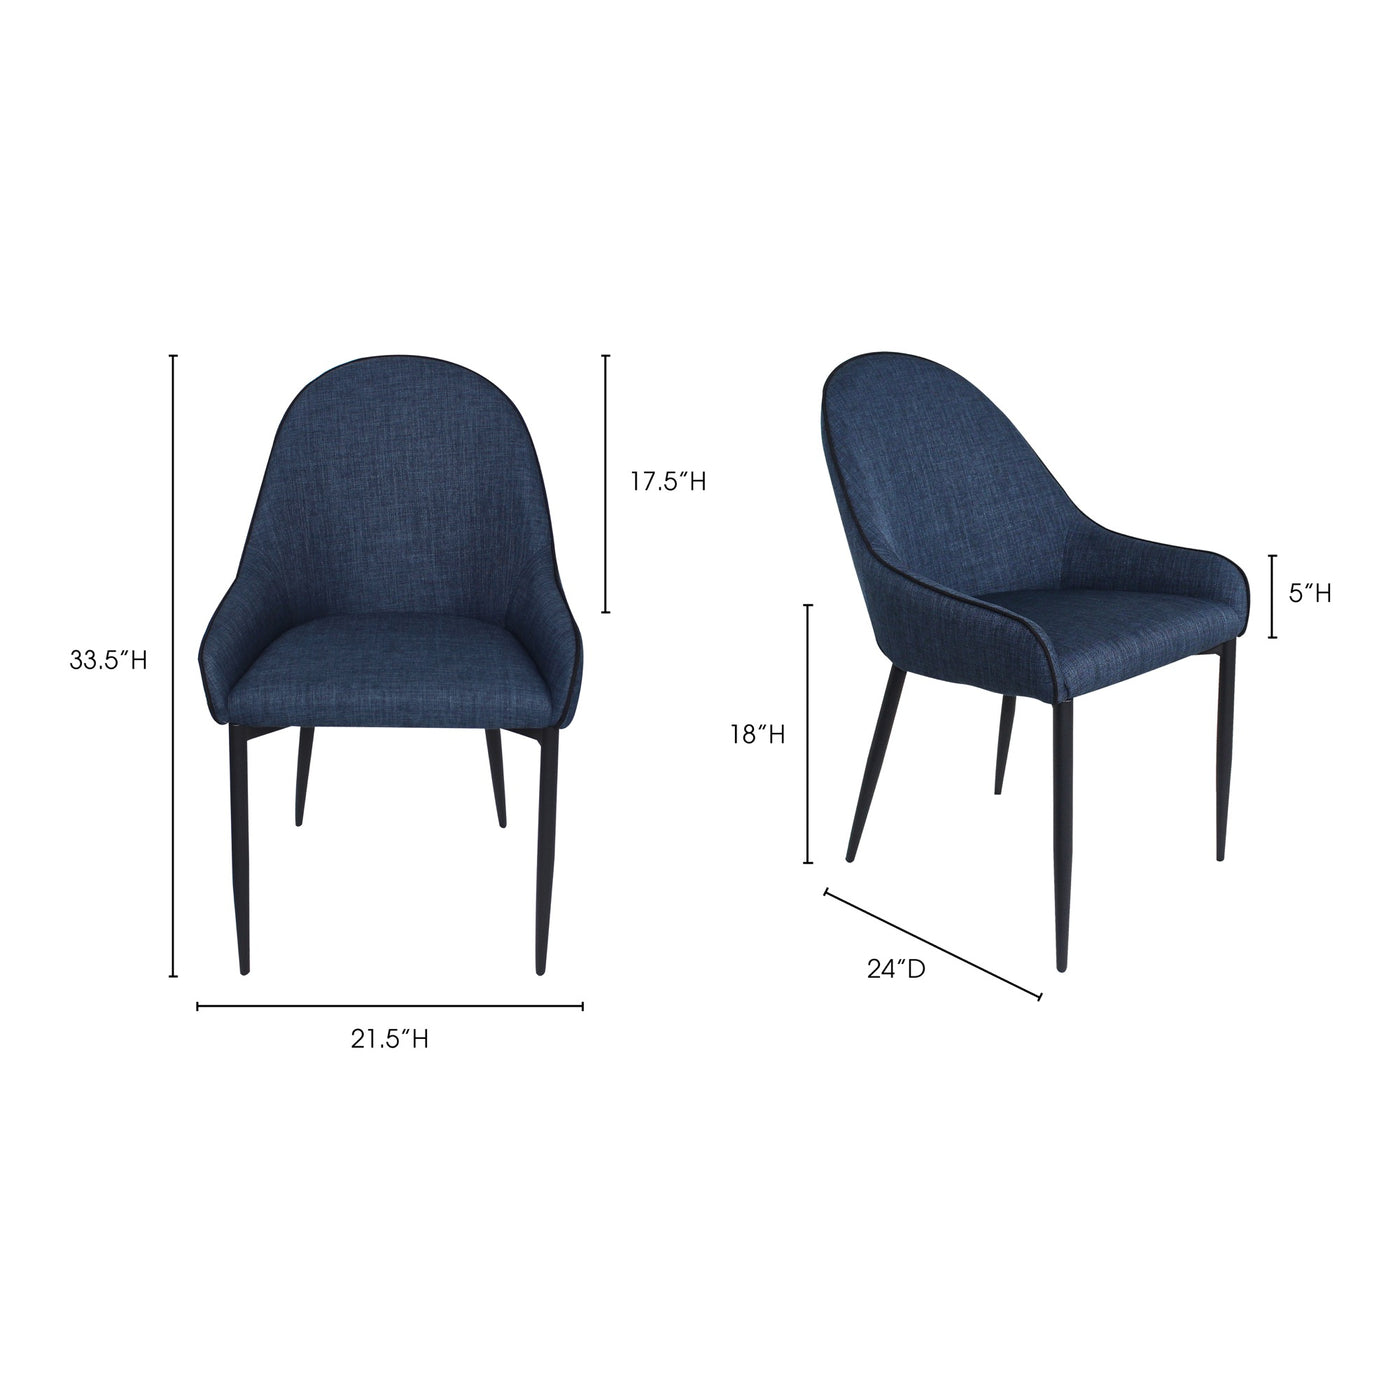 Lapis is a stylish dining chair with a form-fitted upholstery and low arms. The black metal legs provide a classic black-a...